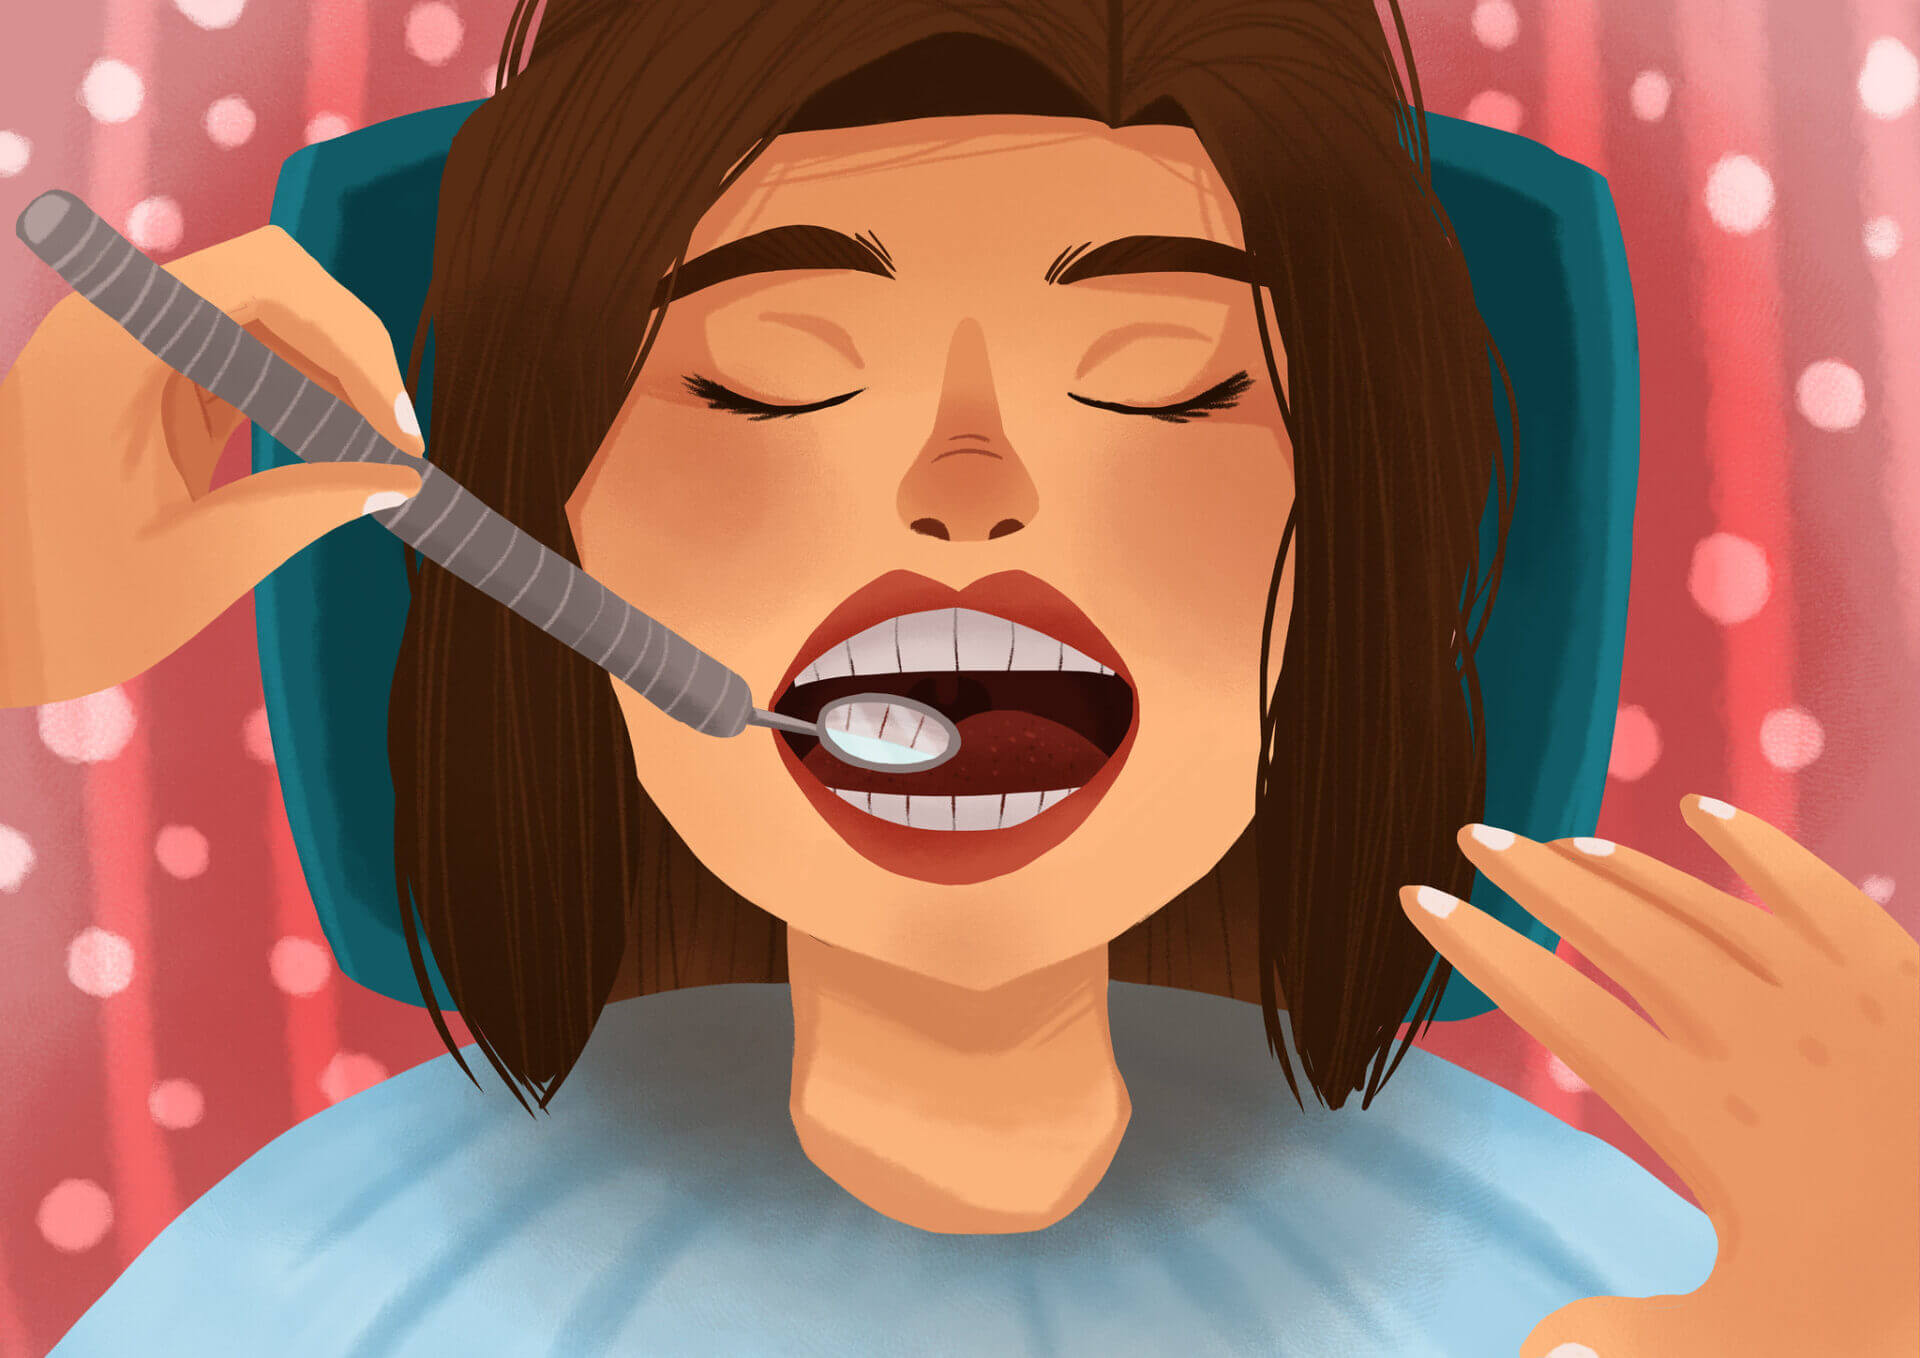 Cartoon of a brunette woman having her teeth and gums examined during her routine checkup at the dentist